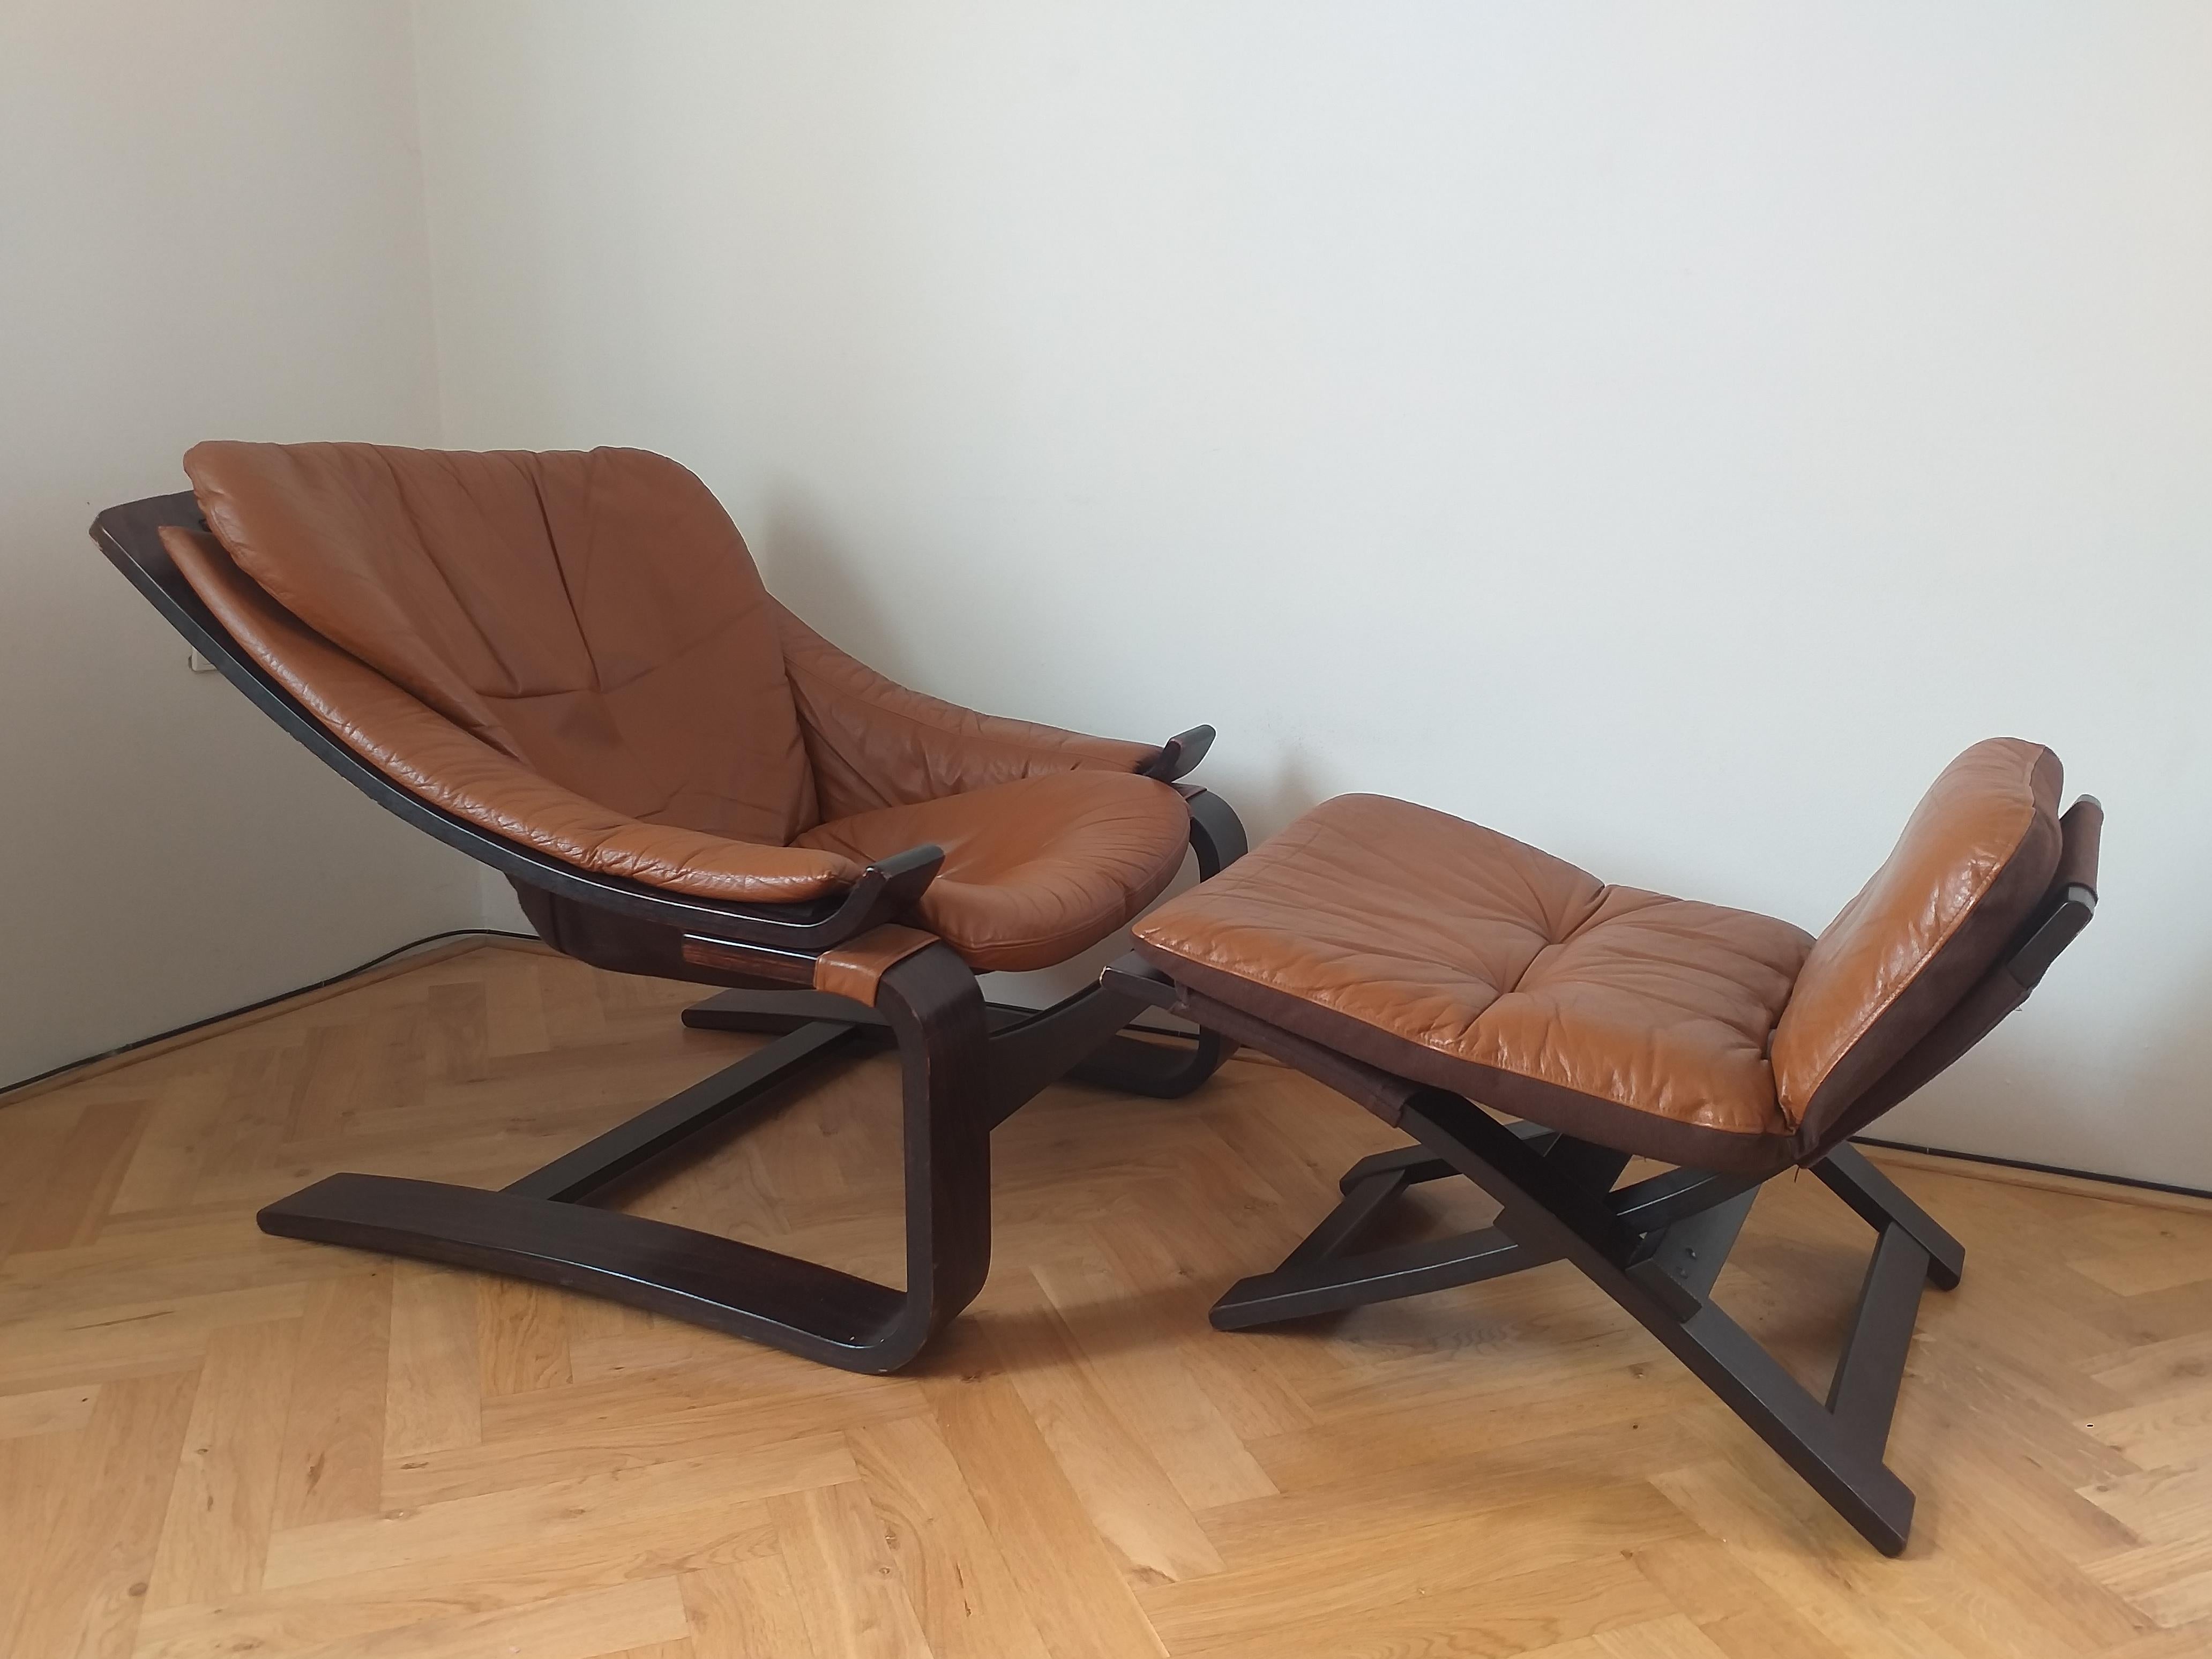 Midcentury Lounge Chair Kroken with Ottoman, Ake Fribytter, Nelo, Sweden, 1970s In Good Condition For Sale In Praha, CZ